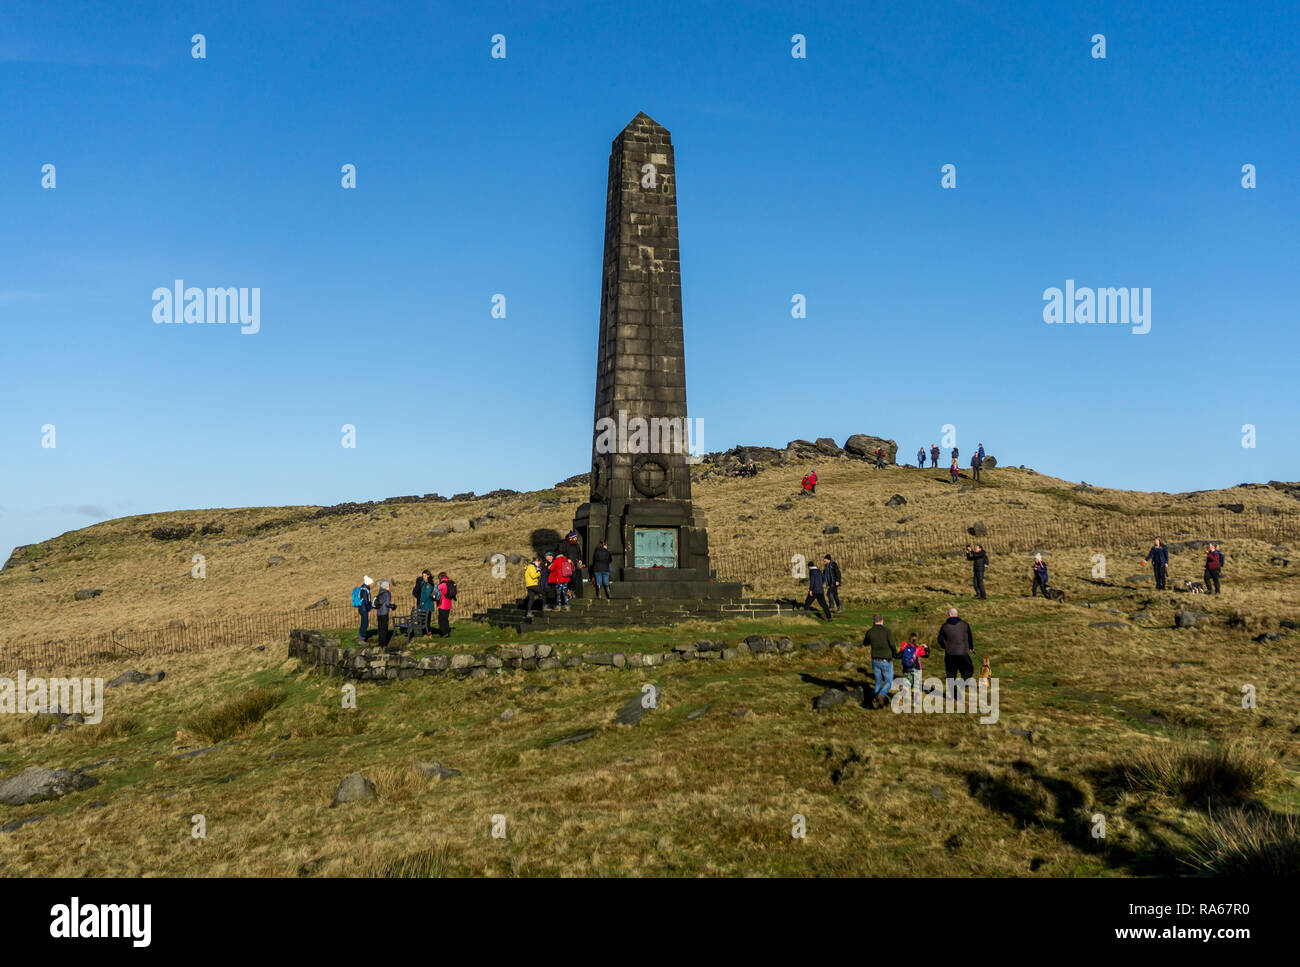 Obelisk War memorial,Aldermans Hill,  Lancashire, UK. 1st January, 2019. A warm sunny New Years Day prompts many walkers and ramblers to climb to the top of Aldermans Hill, Saddleworth moor, to visit the Obelisk War memorial. 1st January 2019. Carl Dickinson/Alamy Live news Stock Photo